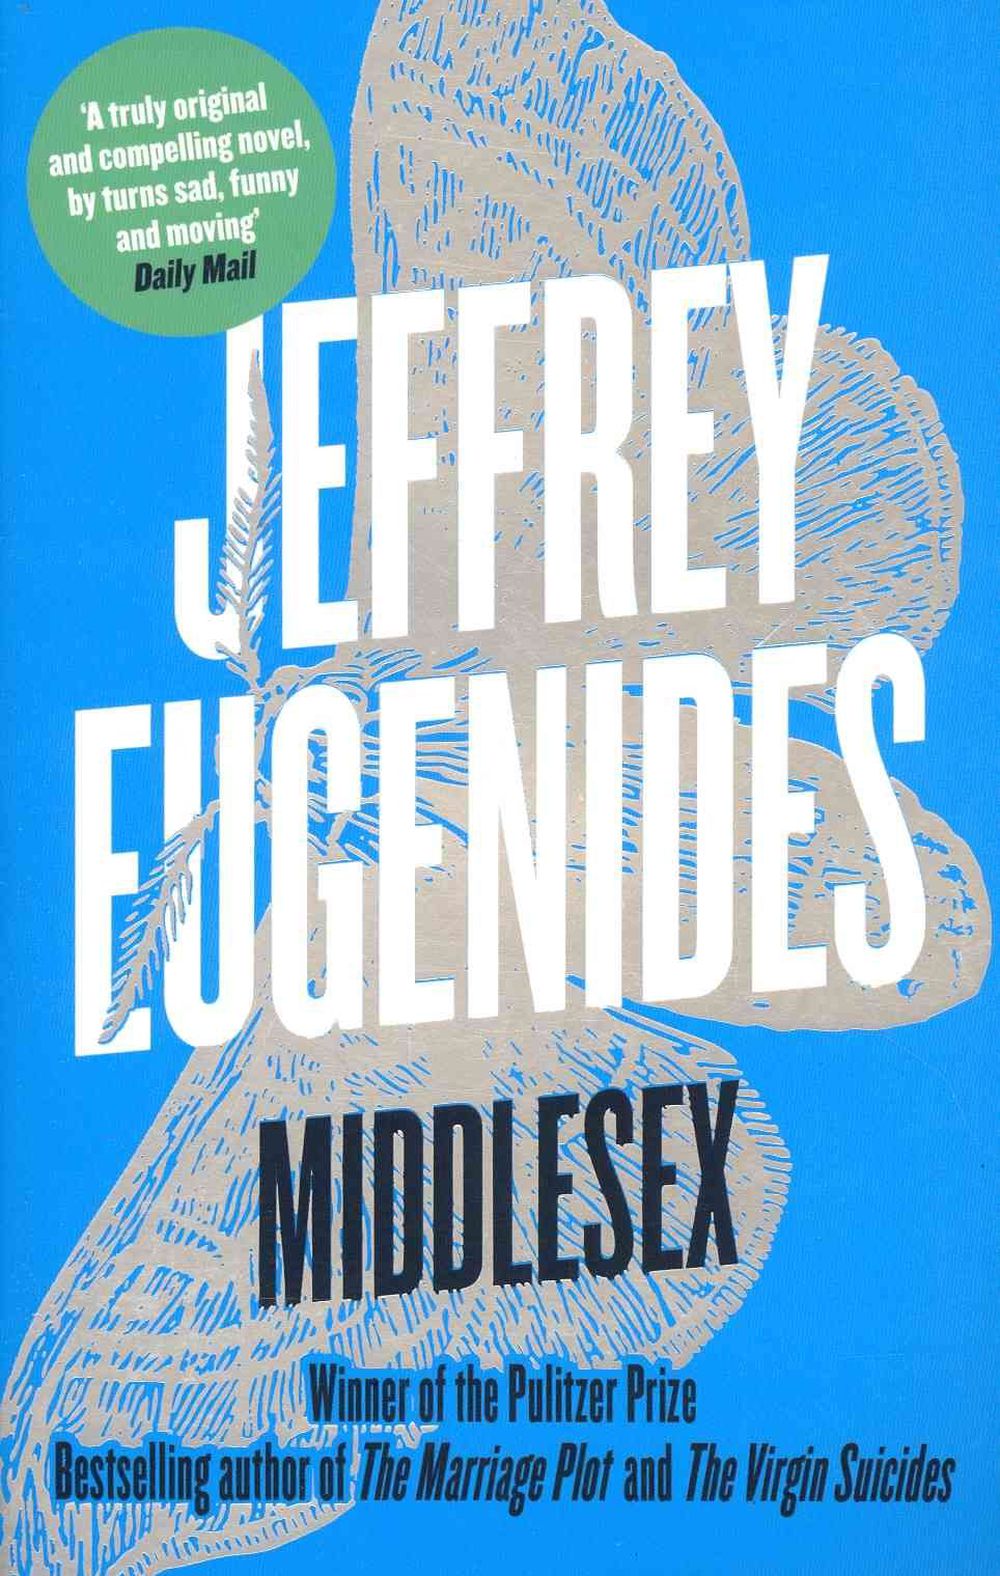 middlesex book review